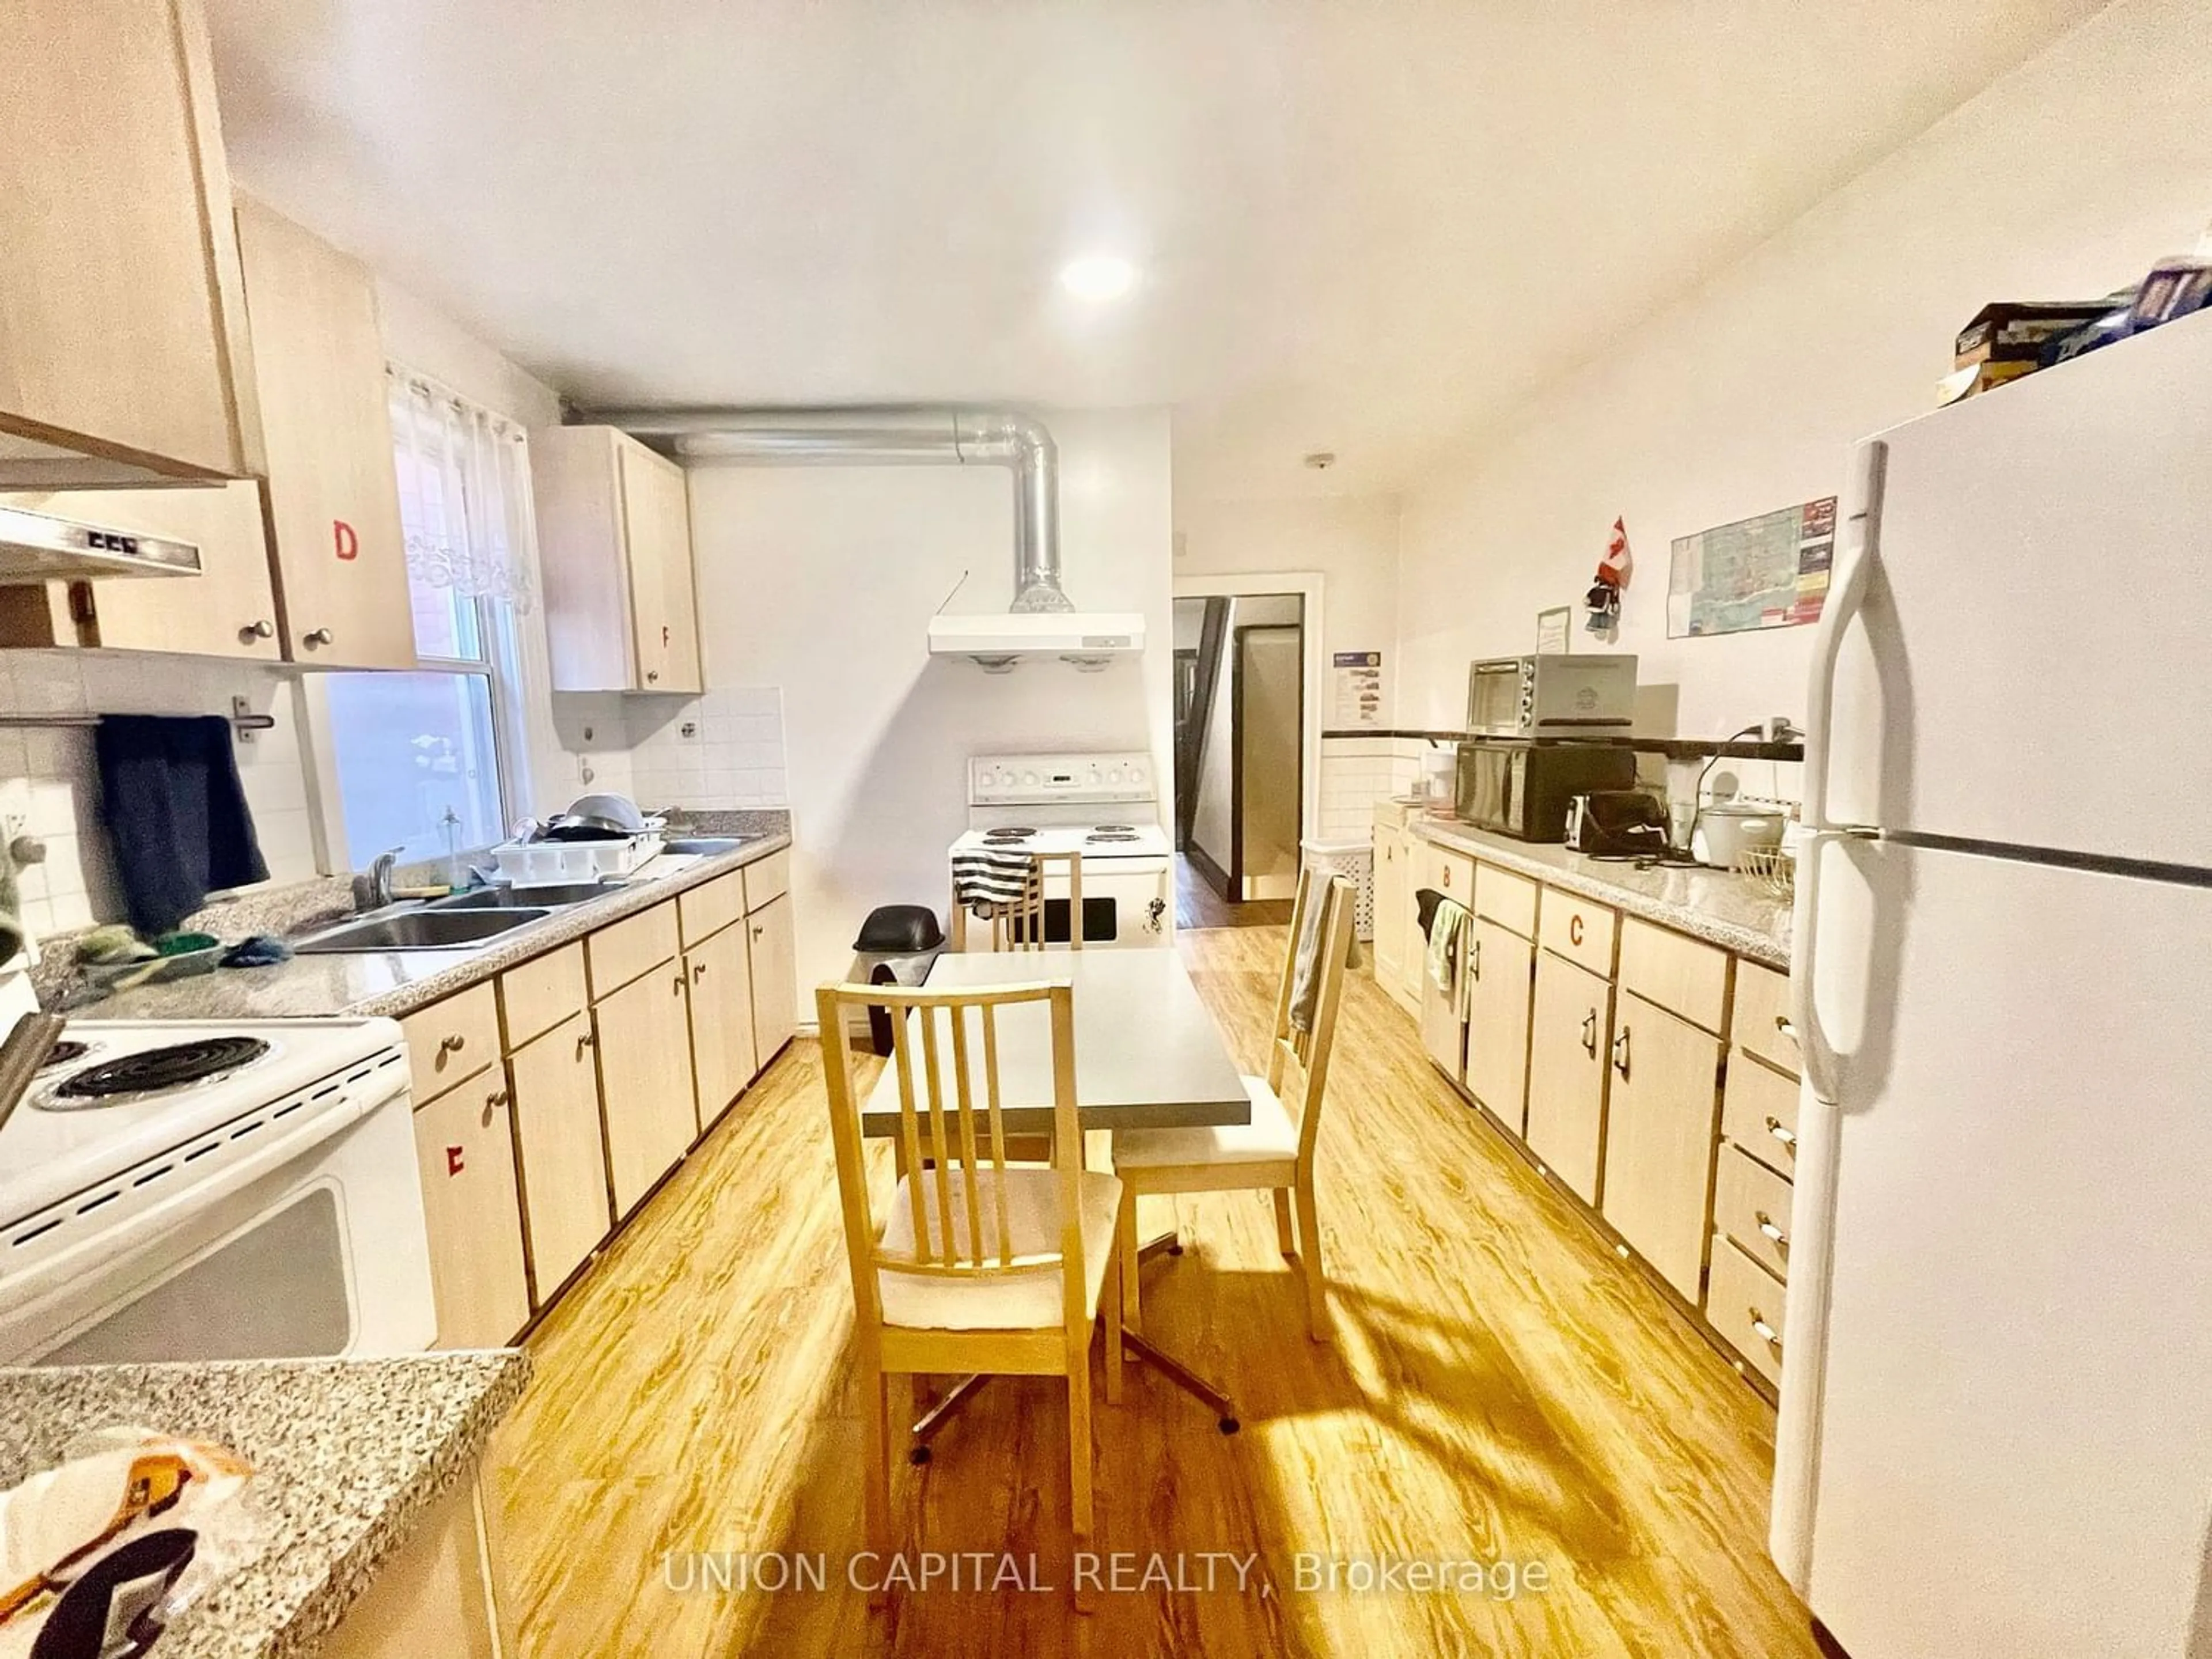 Kitchen with laundary machines for 69 Denison Ave, Toronto Ontario M5T 2M7